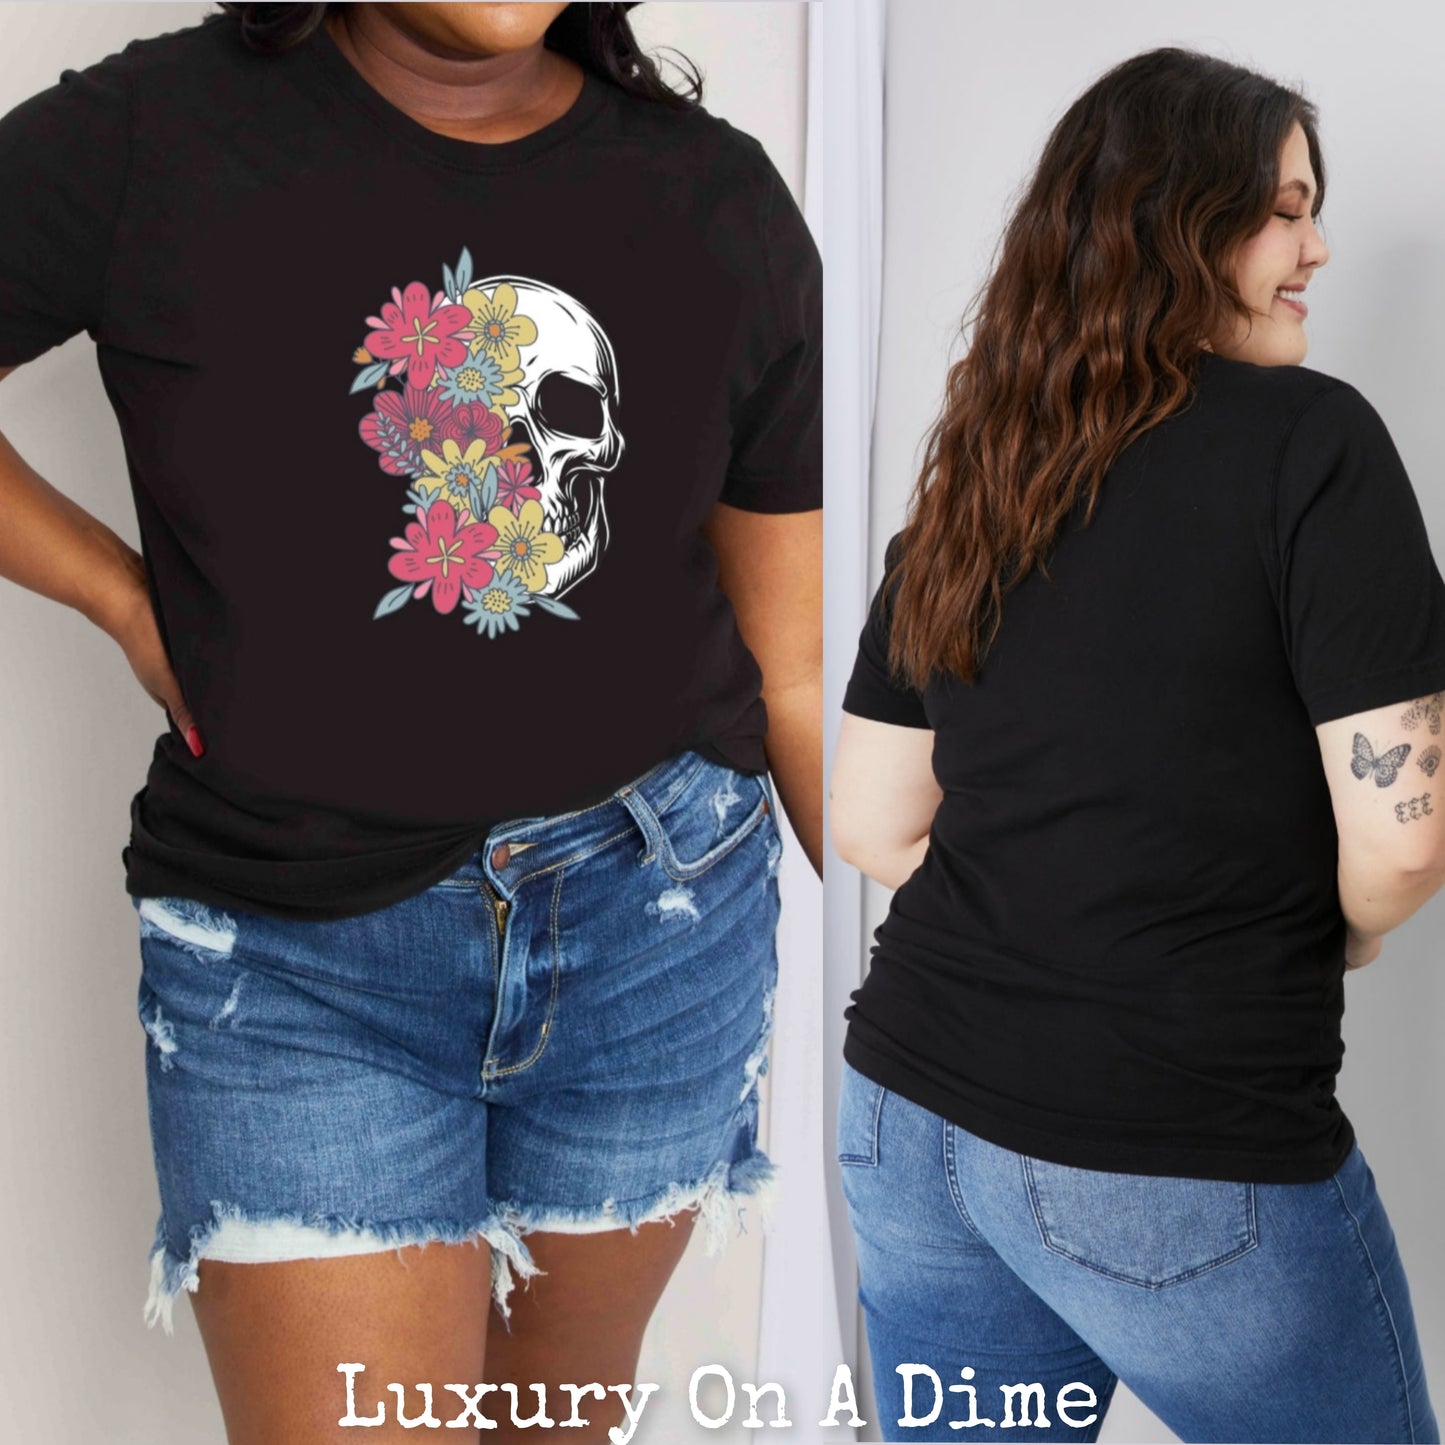 Colorful Floral Skull Graphic 100% Cotton Short Sleeve Tee Shirt (Plus Size Available)